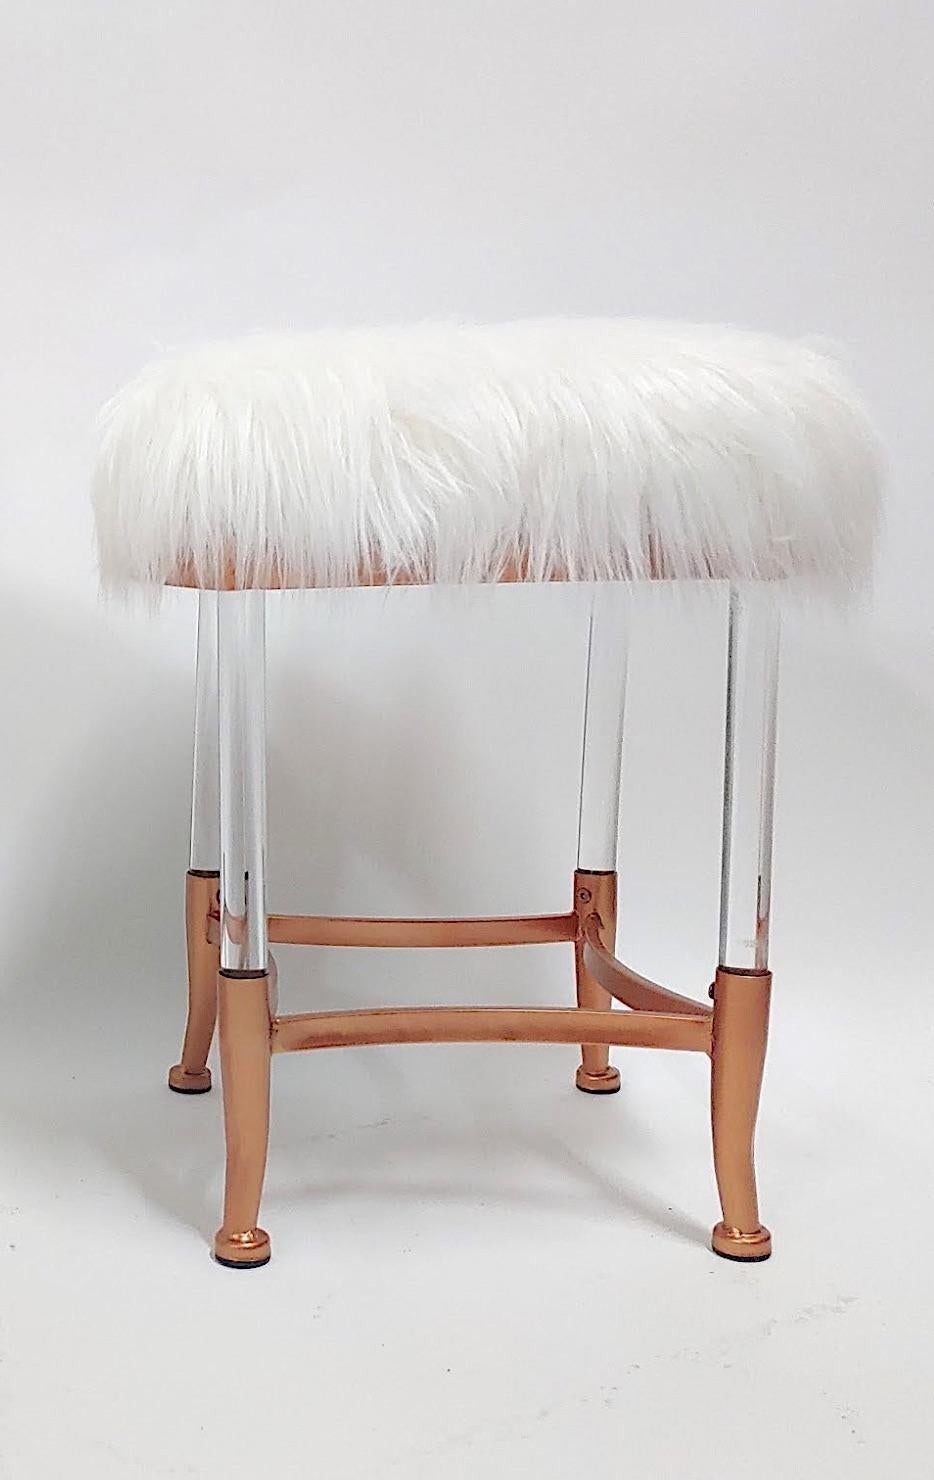 Mid Century Modern Very Rare- incredibly attention getting pair large pair of long hair sheepskin upholstered stools!

Mid-Century Modern 1950s inspired gorgeous pair of copper finished metal foot base frame with inspired clear lucite legs with